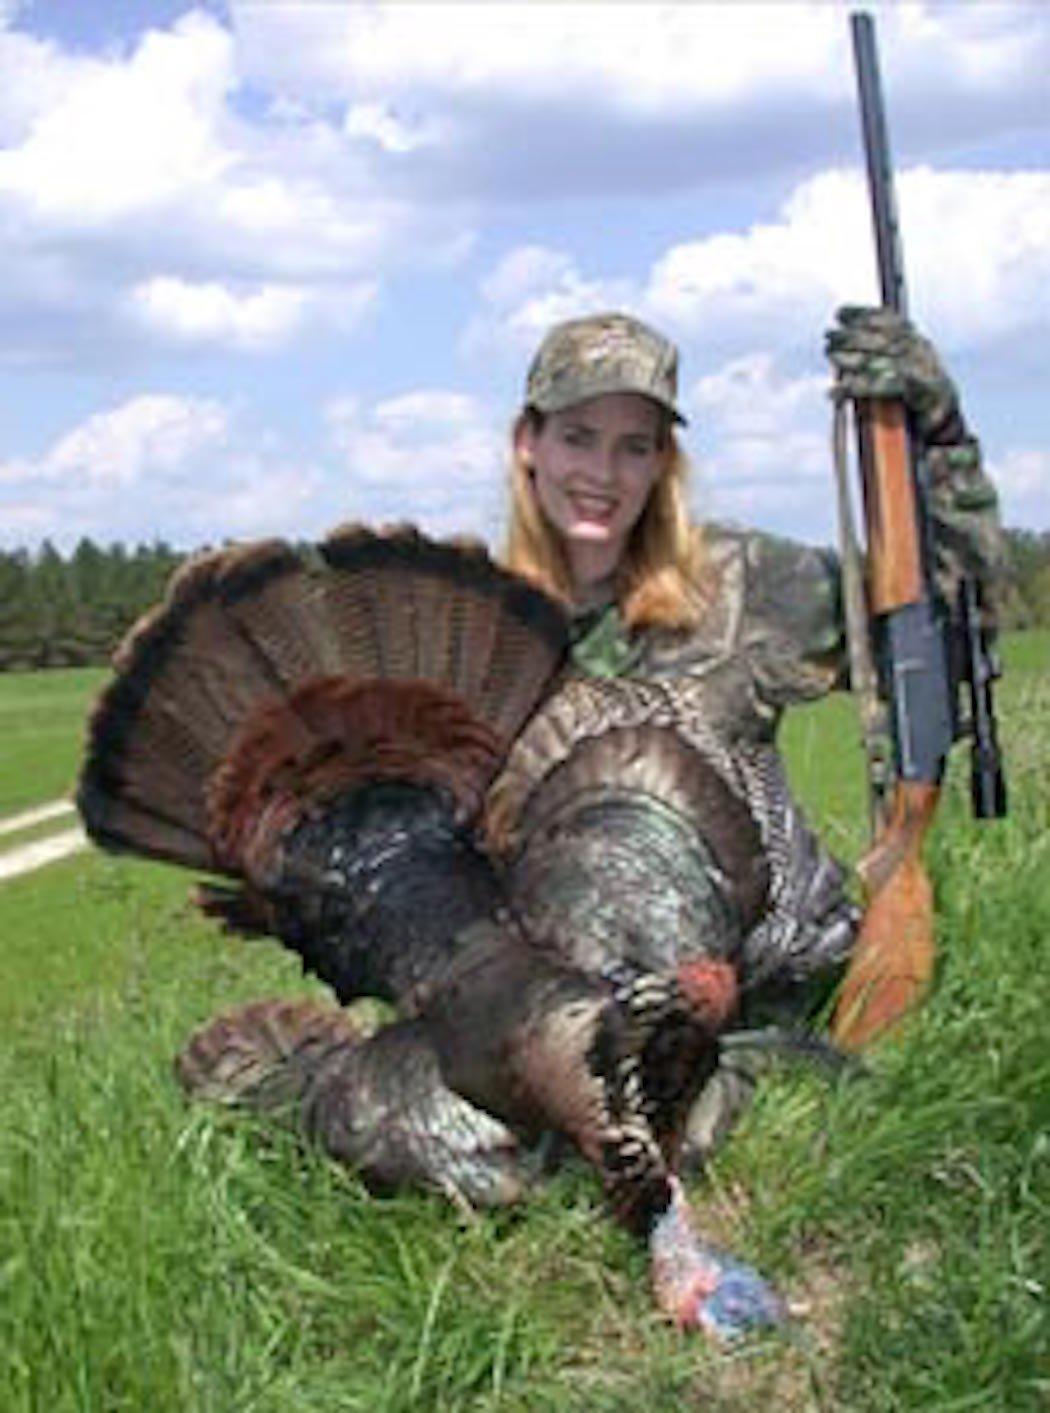 The author with her first bird kill. (Stephanie Mallory photo)